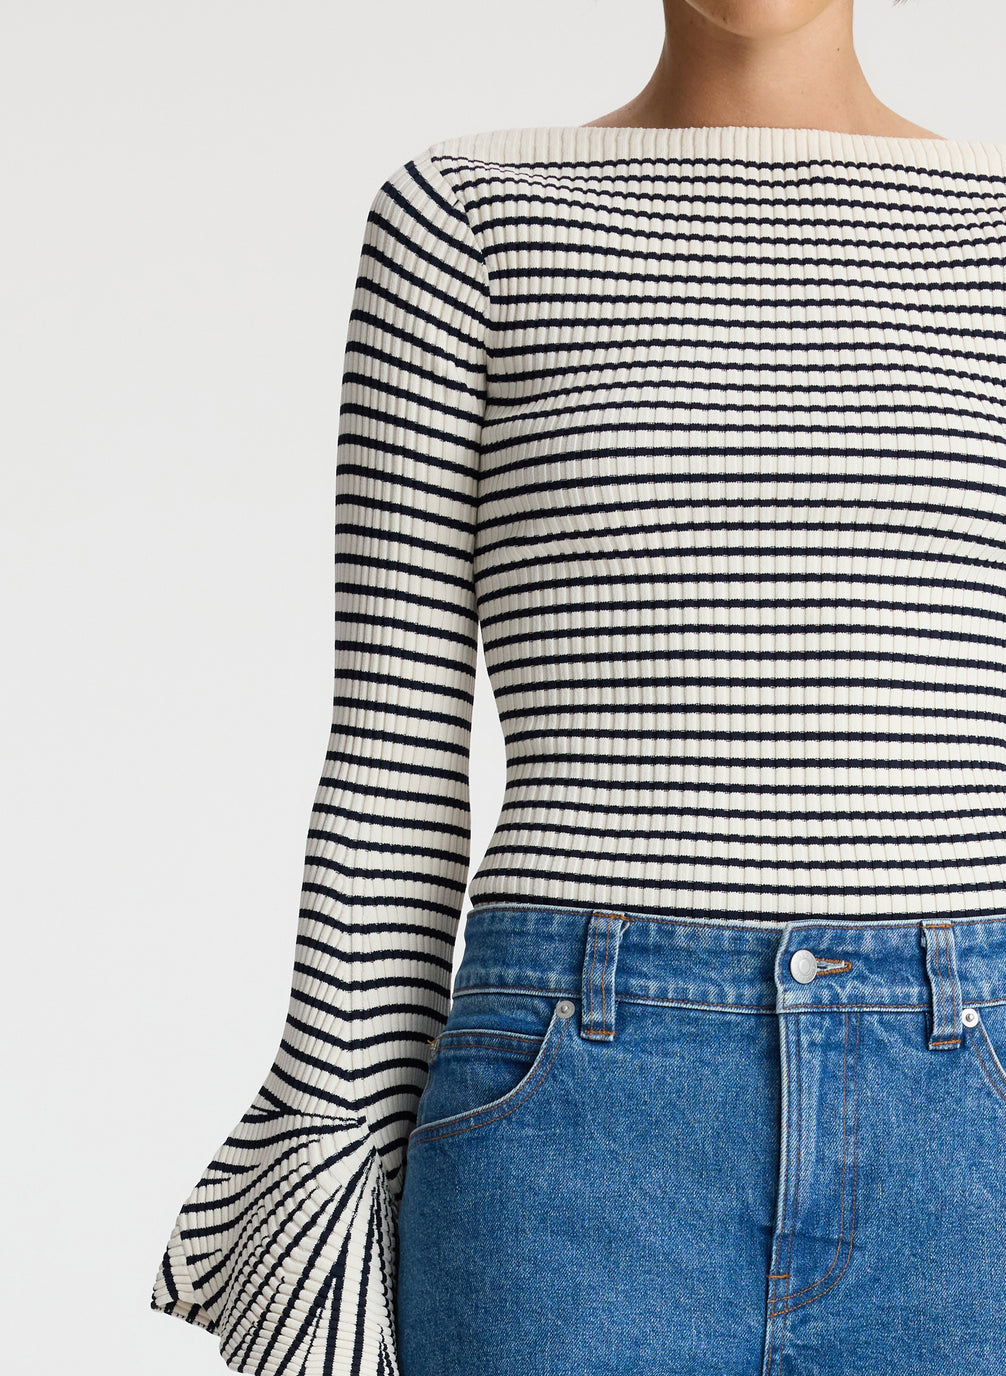 detail view of woman wearing striped long bell sleeve knit top and medium blue wash denim jeans